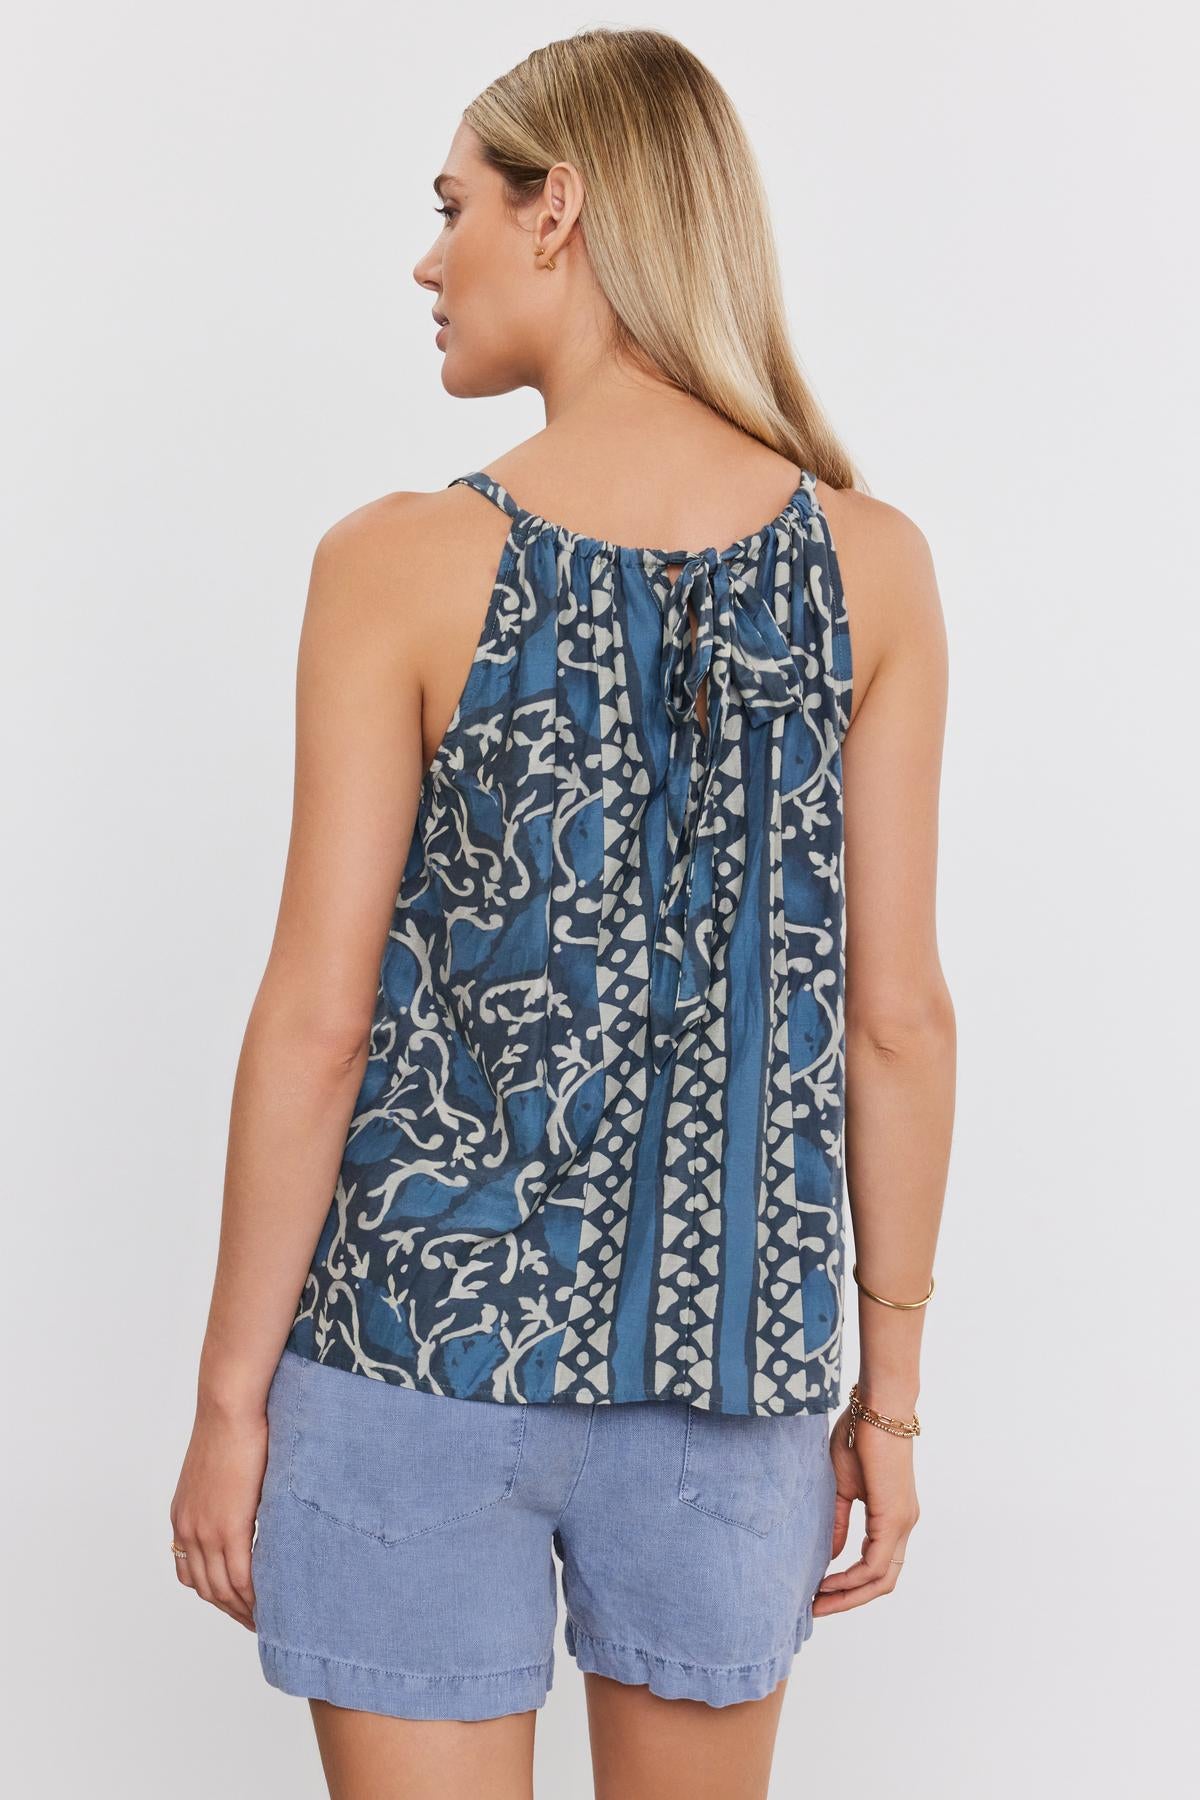 Woman in a blue printed silk cotton voile RHEA TANK TOP with tie straps at the neck, paired with denim shorts, viewed from behind. Brand: Velvet by Graham & Spencer-36918810280129